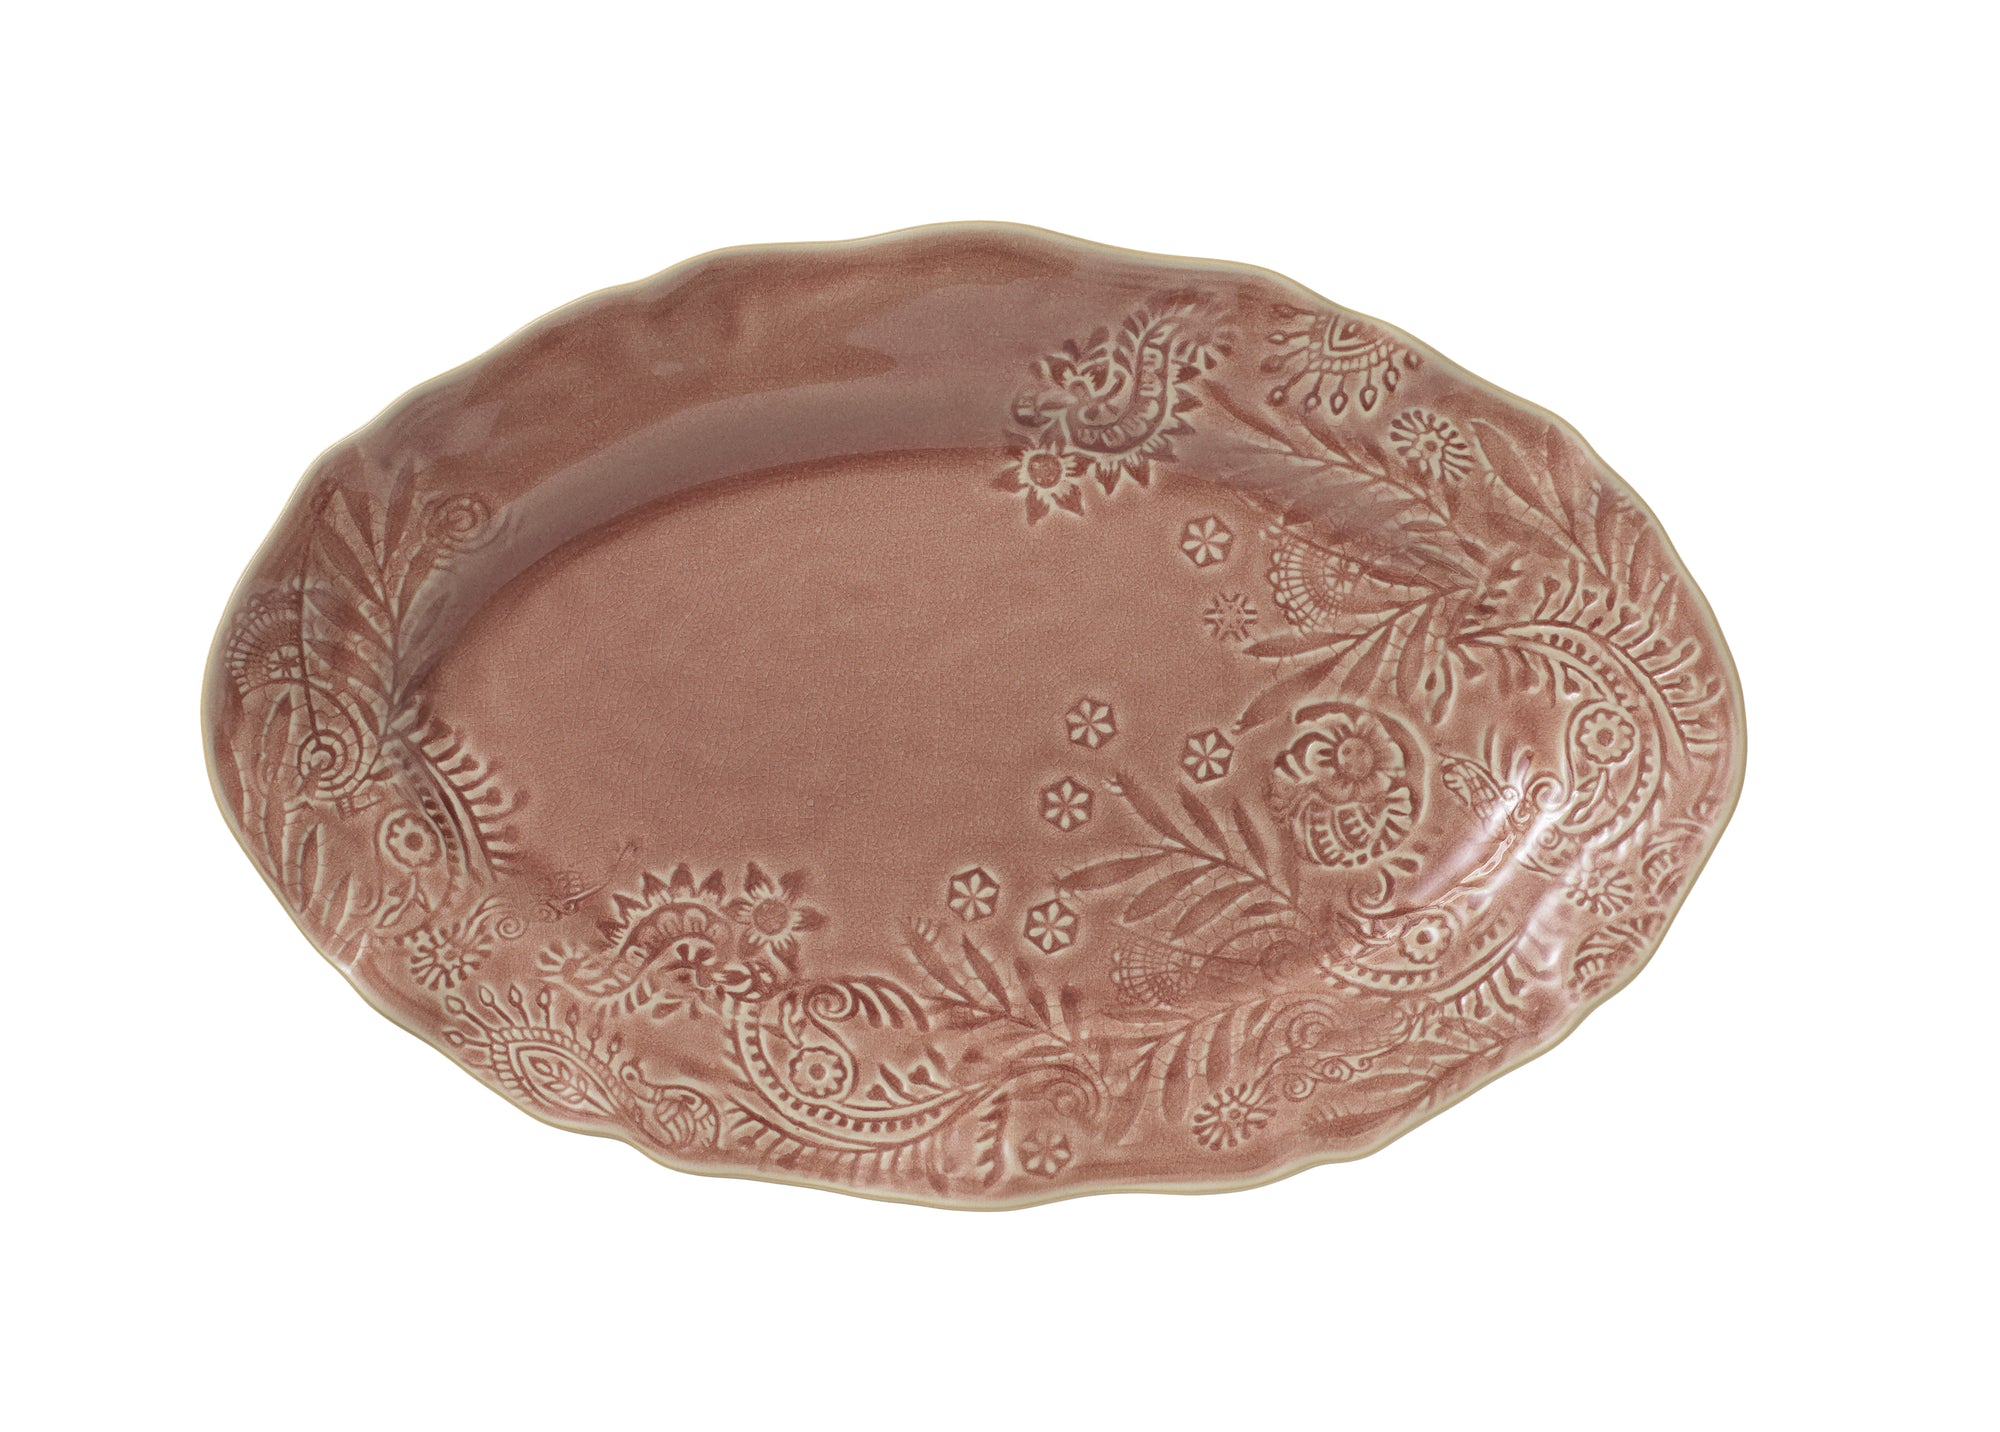 Small Oval Server